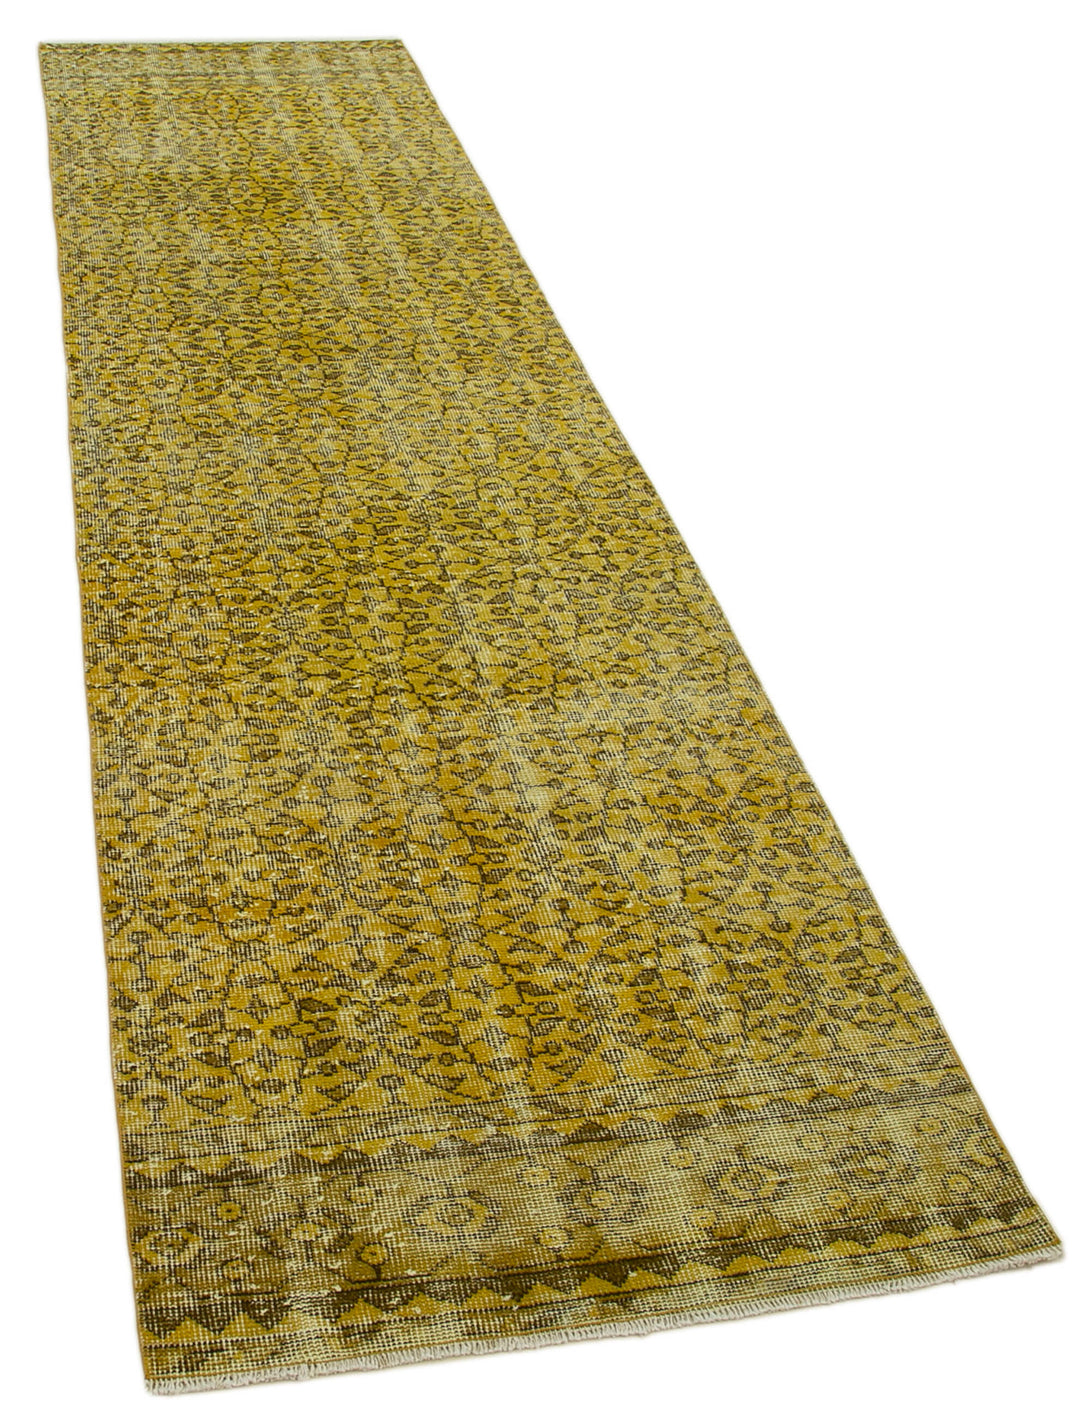 Handmade Overdyed Runner > Design# OL-AC-37164 > Size: 2'-7" x 10'-2", Carpet Culture Rugs, Handmade Rugs, NYC Rugs, New Rugs, Shop Rugs, Rug Store, Outlet Rugs, SoHo Rugs, Rugs in USA